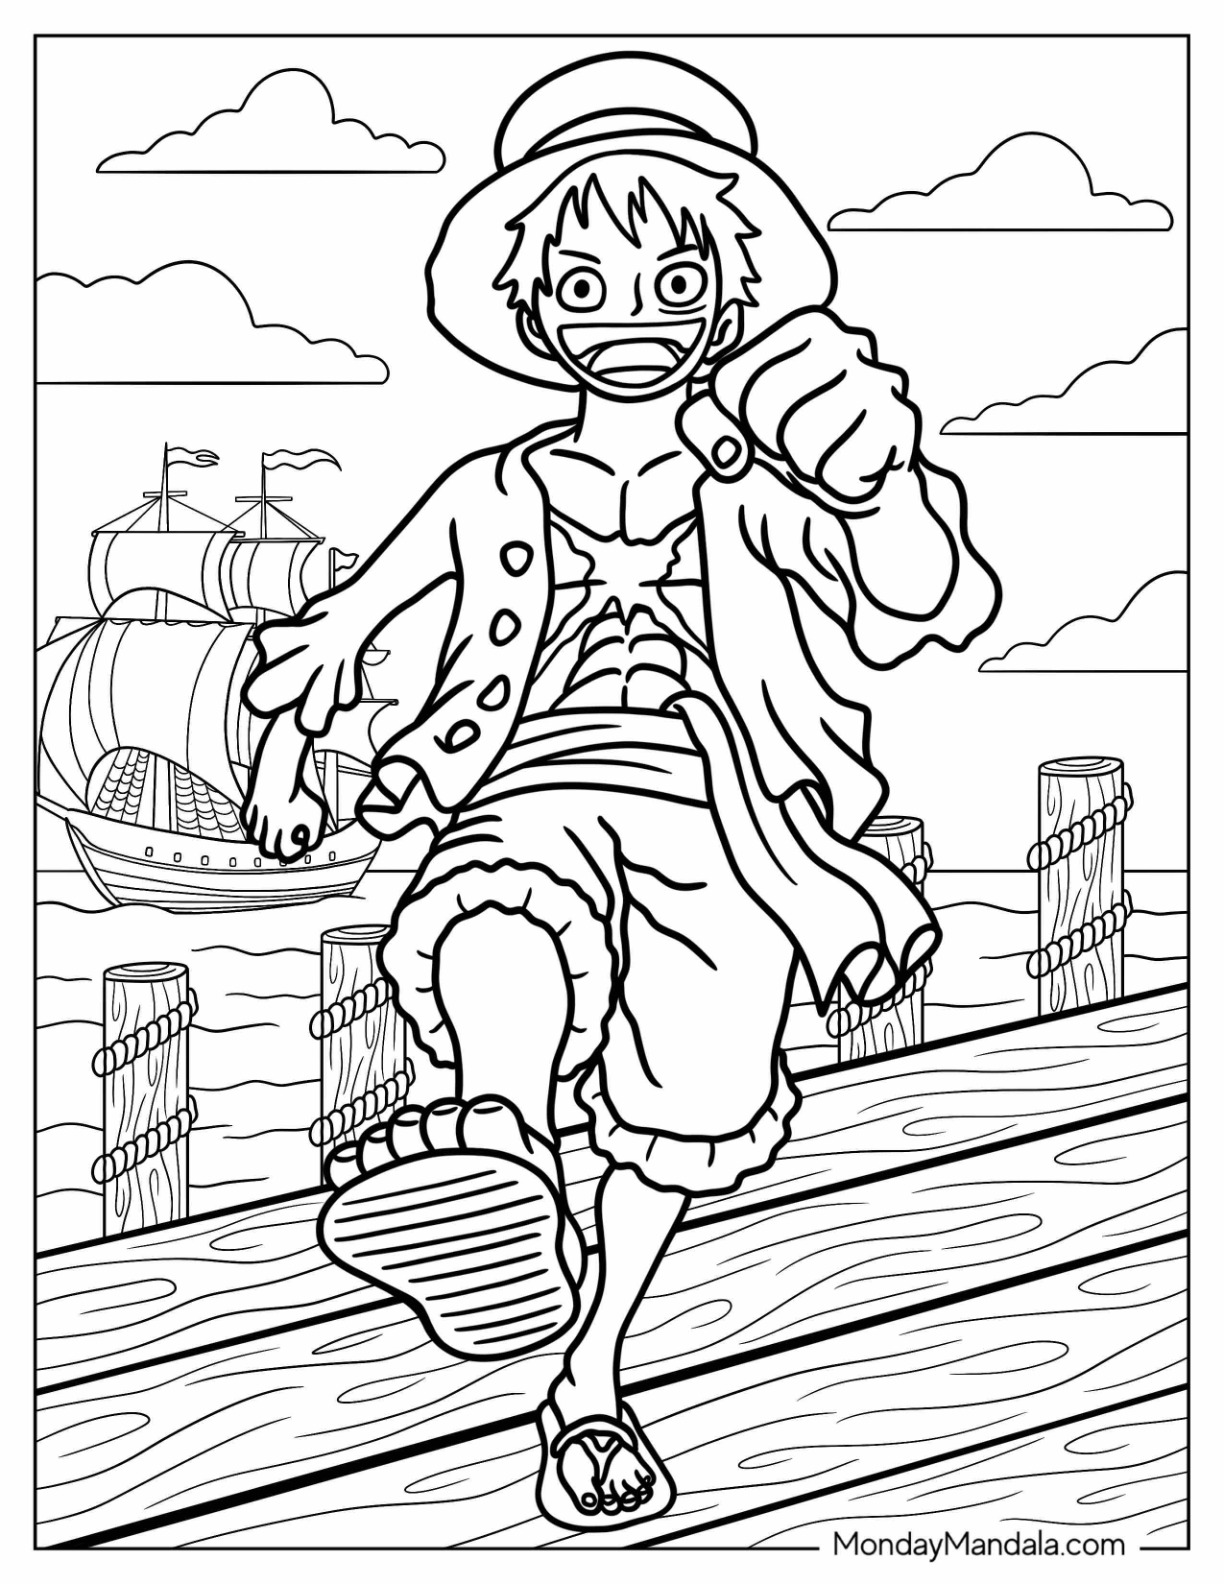 30 One Piece Coloring Pages (Free PDF Printables)